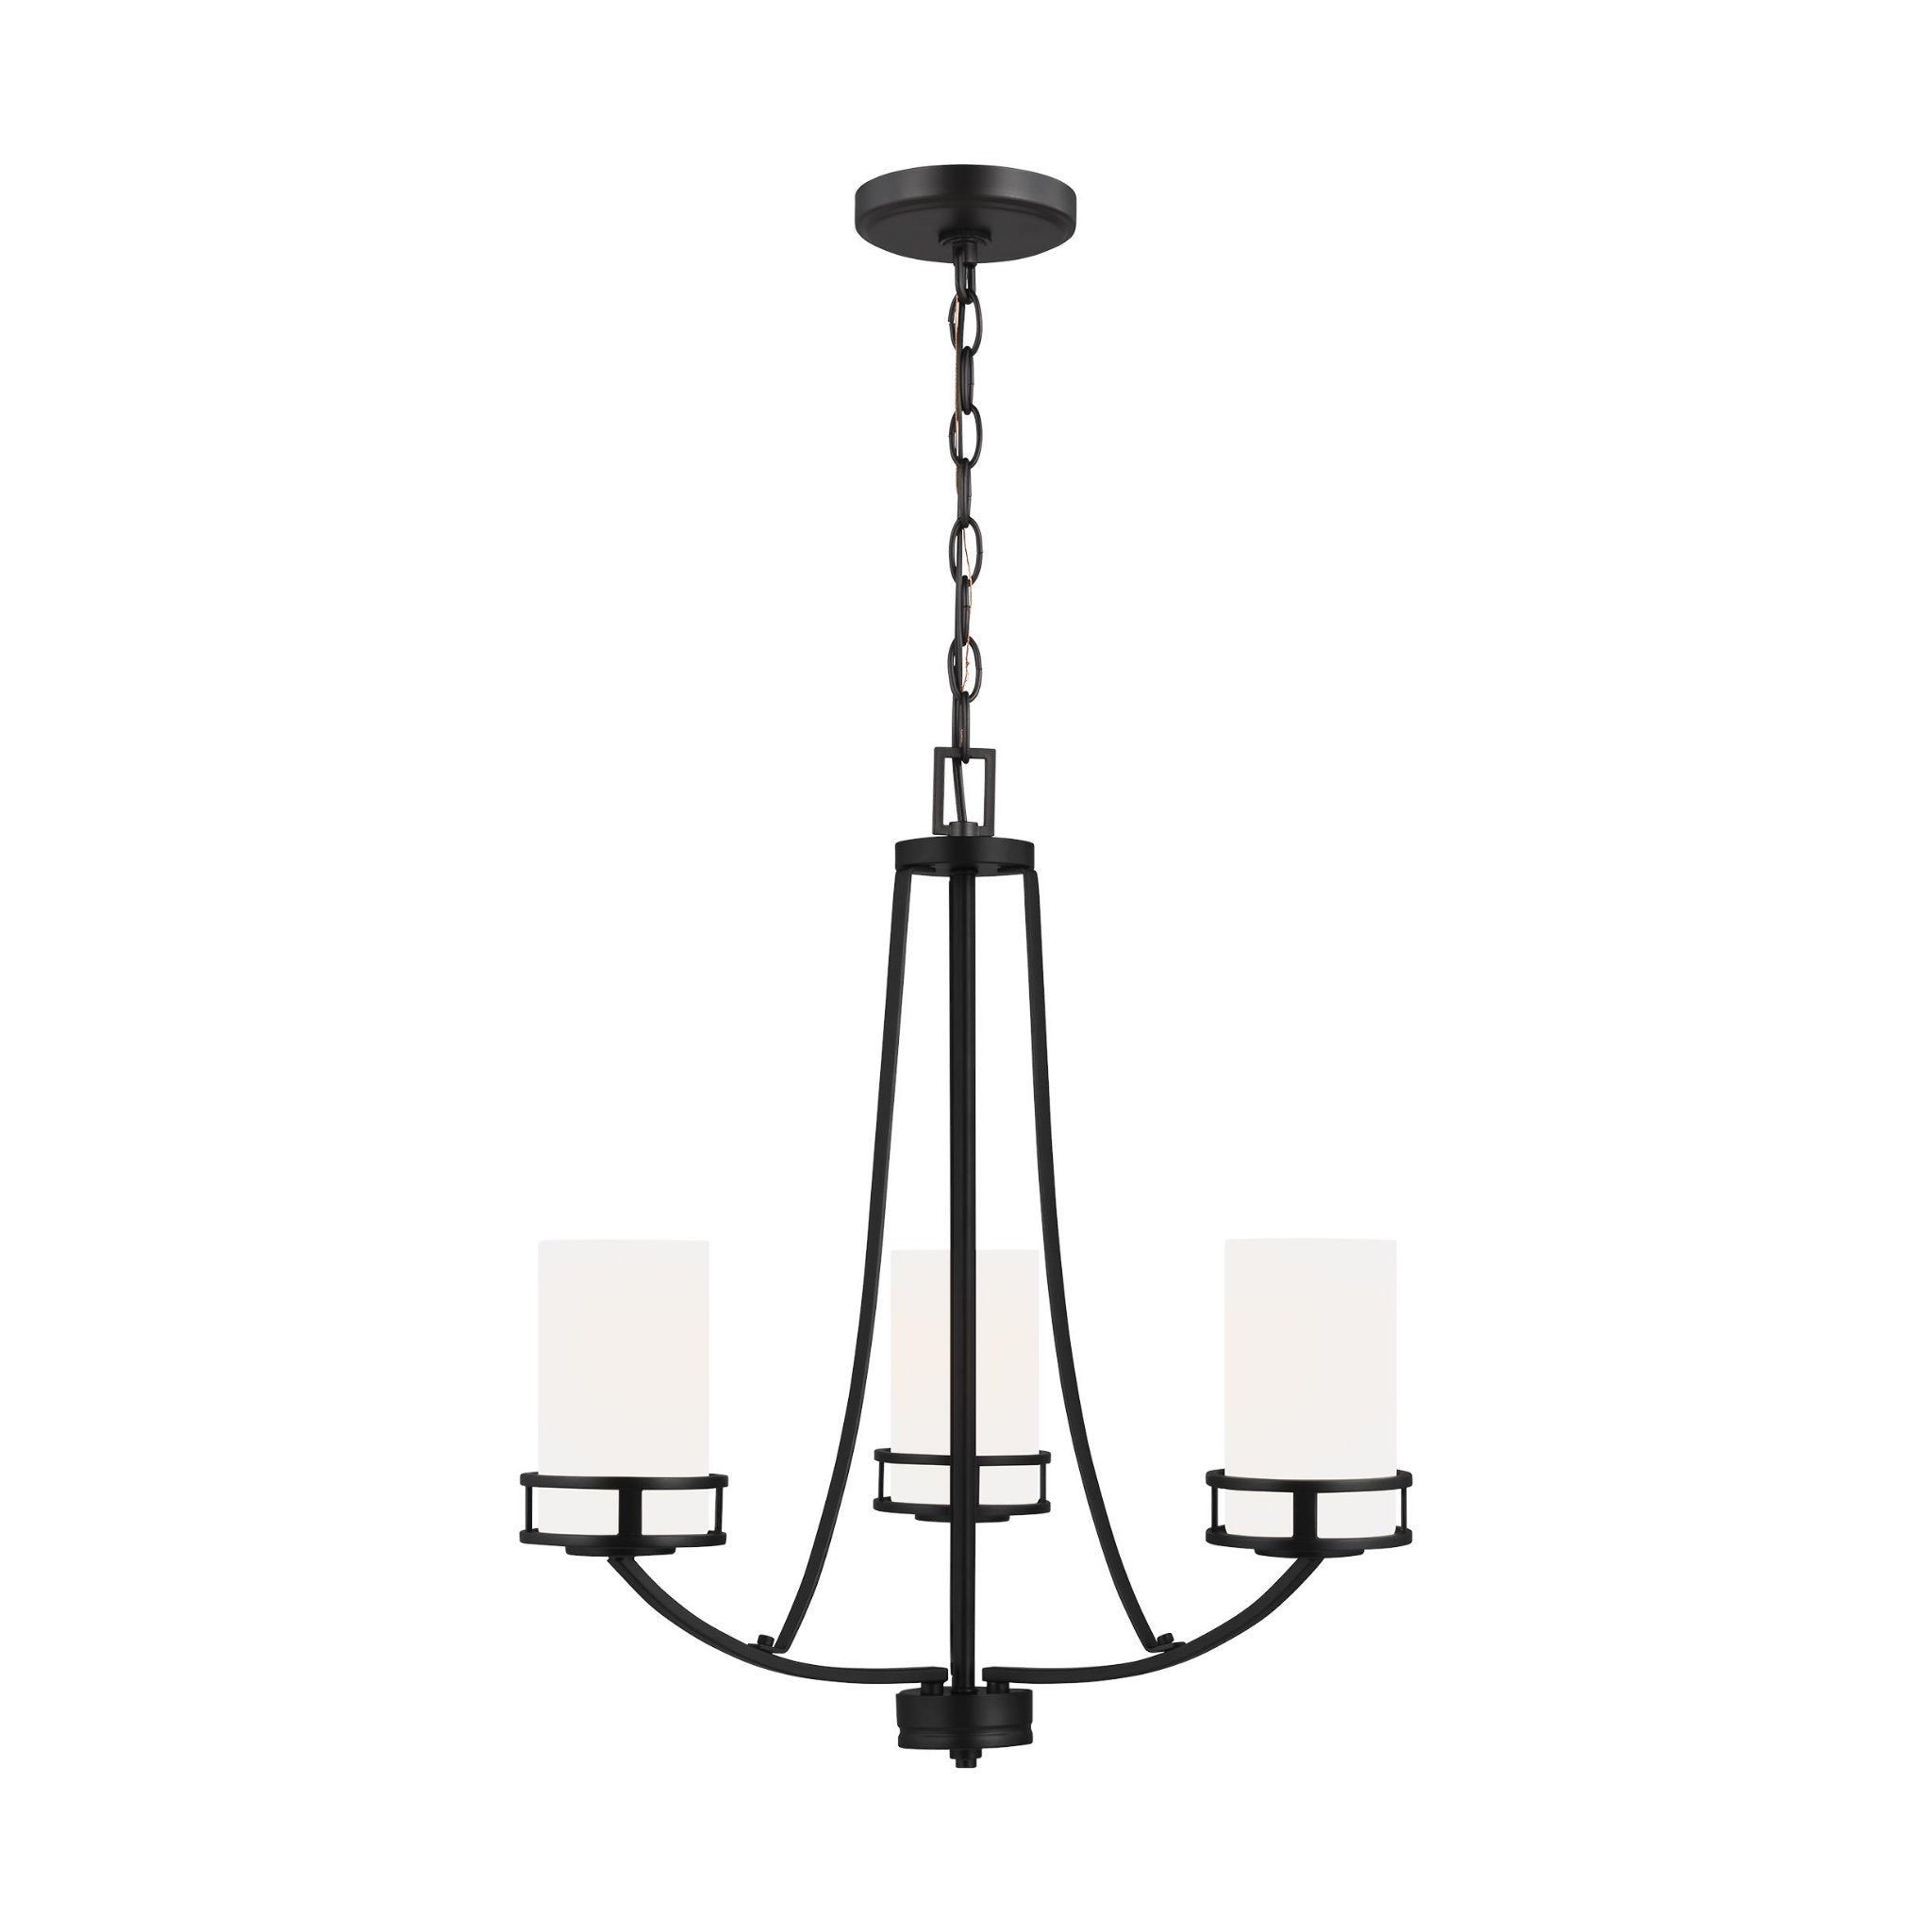 Robie Three Light Chandelier Transitional 22.125" Height Steel Round Etched / White Inside Shade in Midnight Black